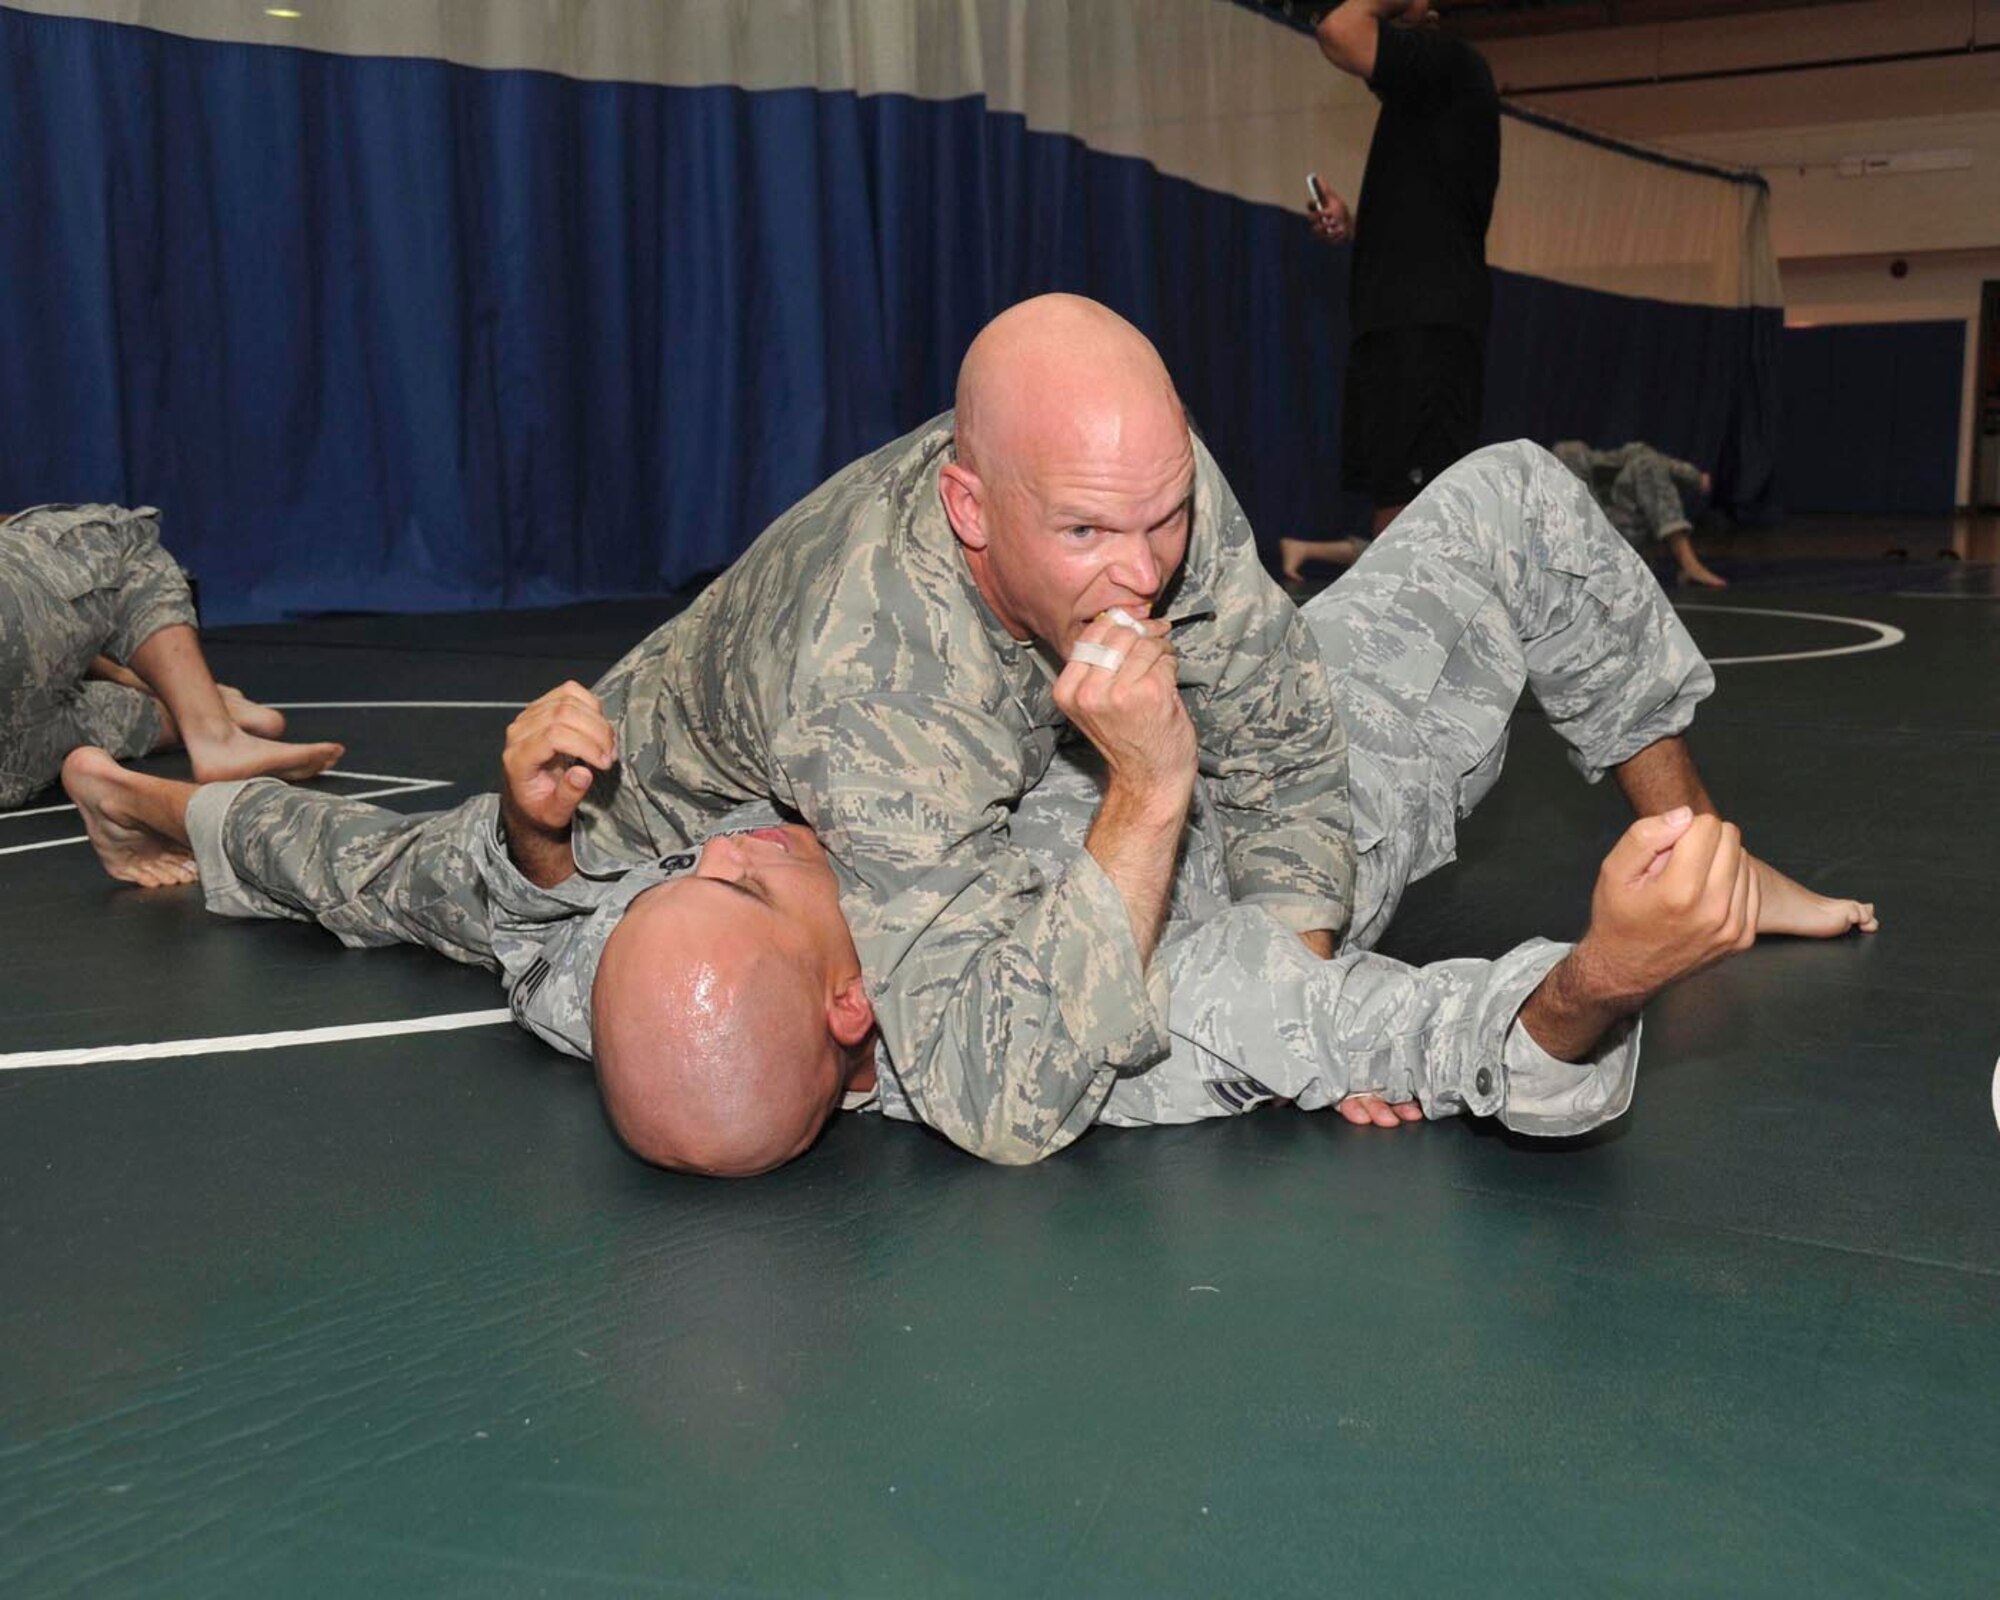 Lt. Col. Tim Thurston, 322nd Training Squadron commander, attempts to pin Staff Sgt. Mark Velasquez, a security forces technical training instructor with the 343rd TRS, during a grappling drill June 12 at the Warhawk Fitness Center. Soldiers from Army III Corps, Fort Hood, Texas, were here last week to teach the Modern Army Combatives Program course to instructors from Air Force Basic Military Training and the security forces technical training school. (U.S. Air Force photo/Alan Boedeker)